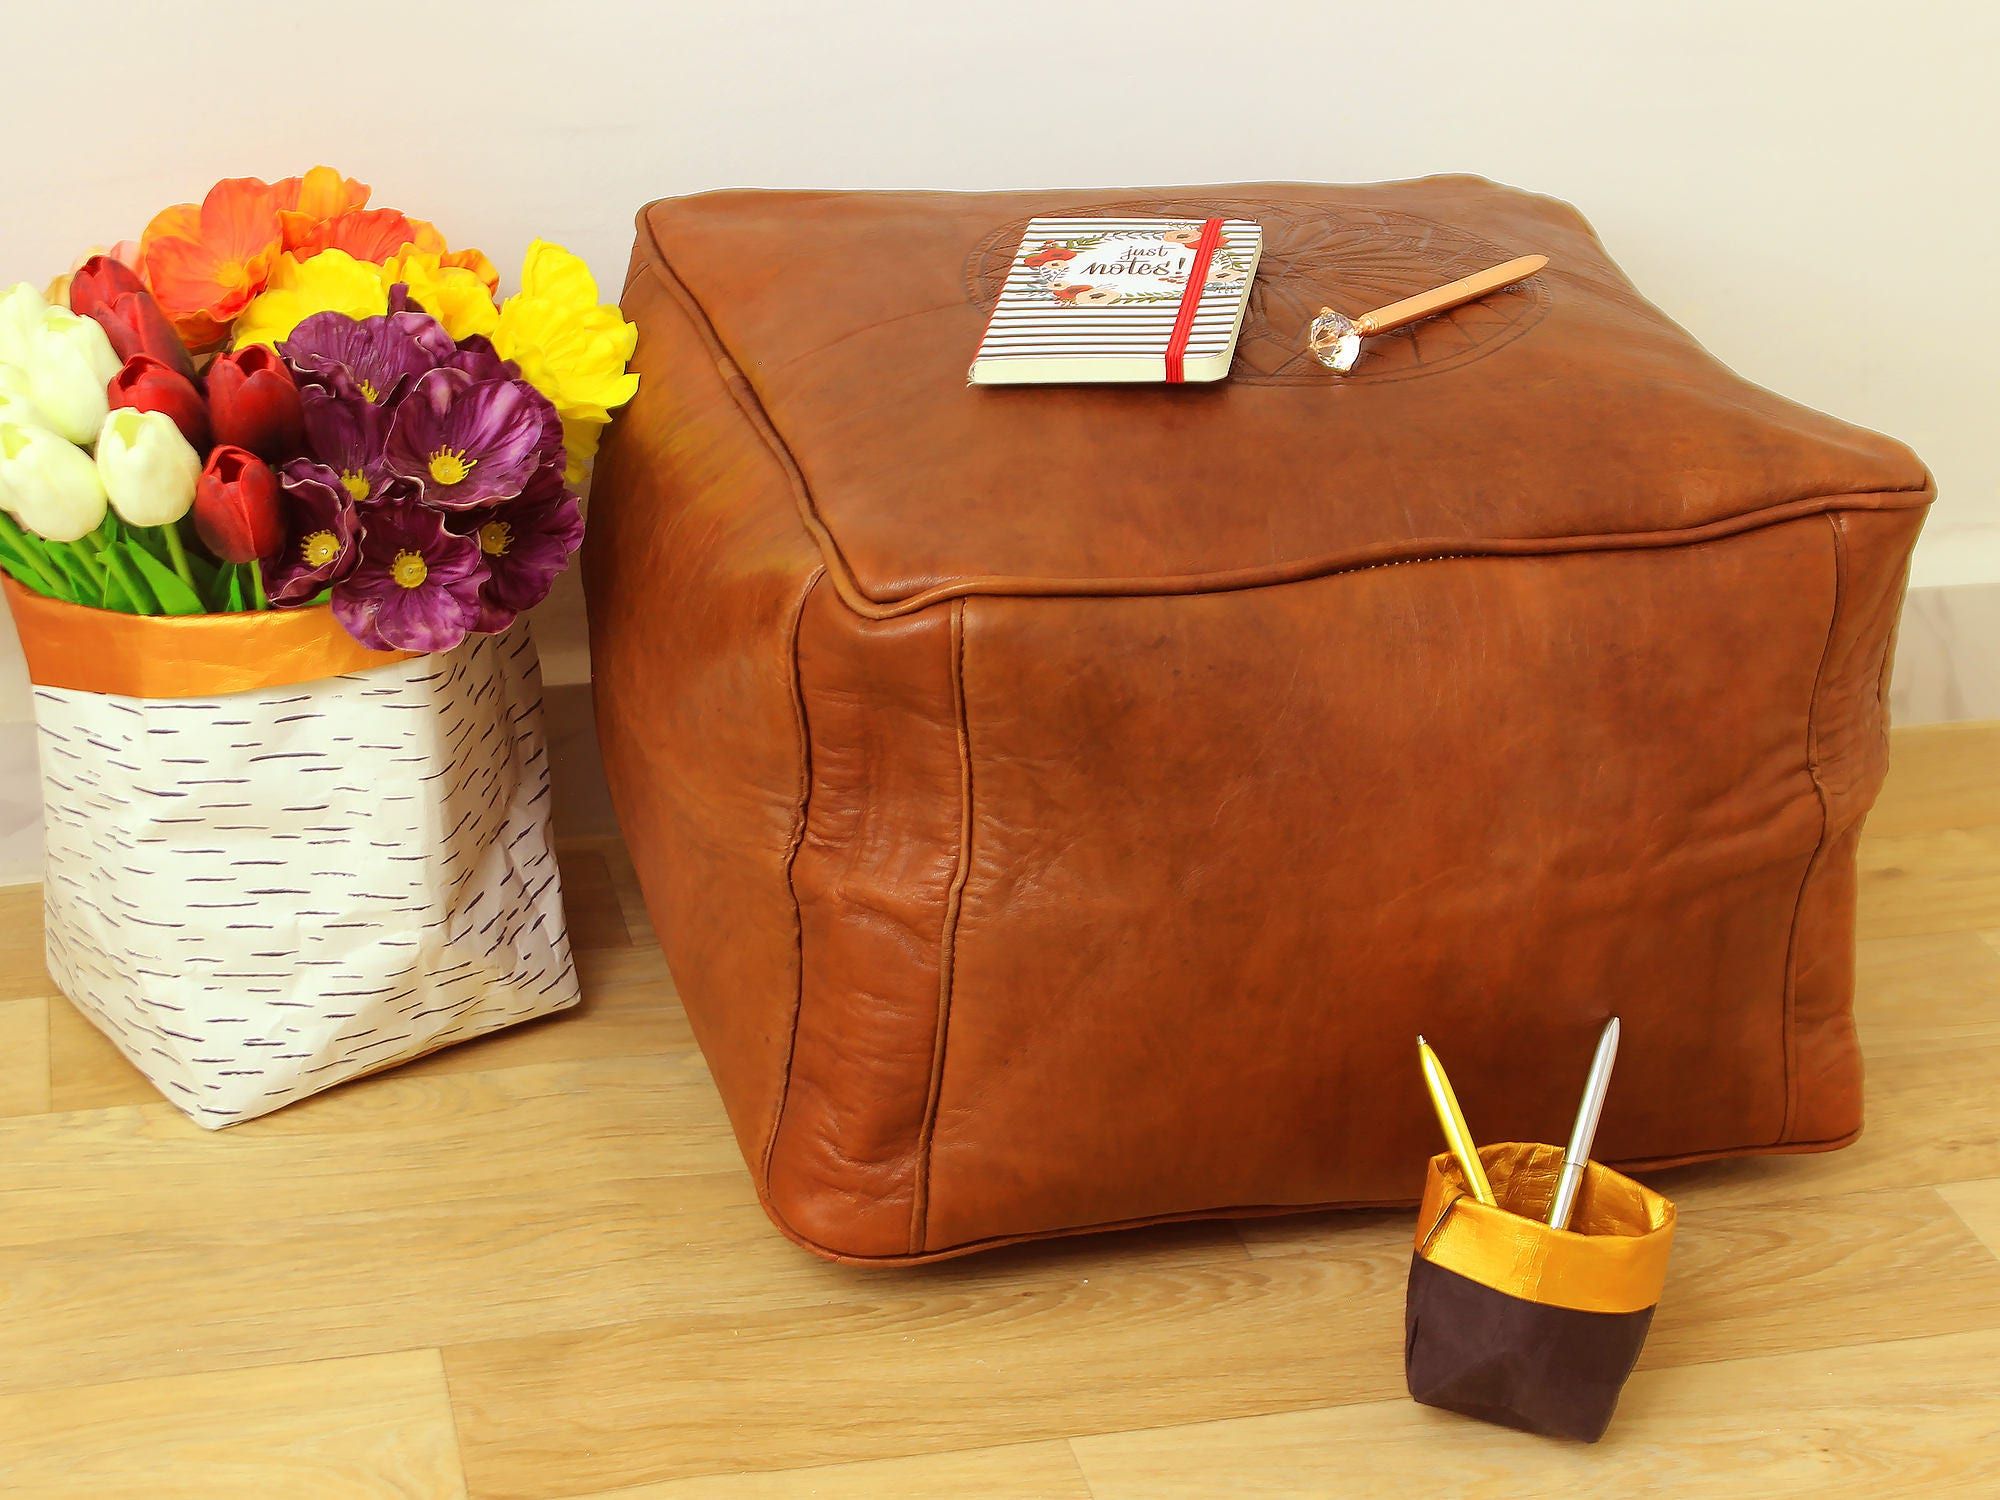 Brown Leather Moroccan Pouf Ottoman Handmade Leather Pouf Within Brown Leather Tan Canvas Pouf Ottomans (View 8 of 20)